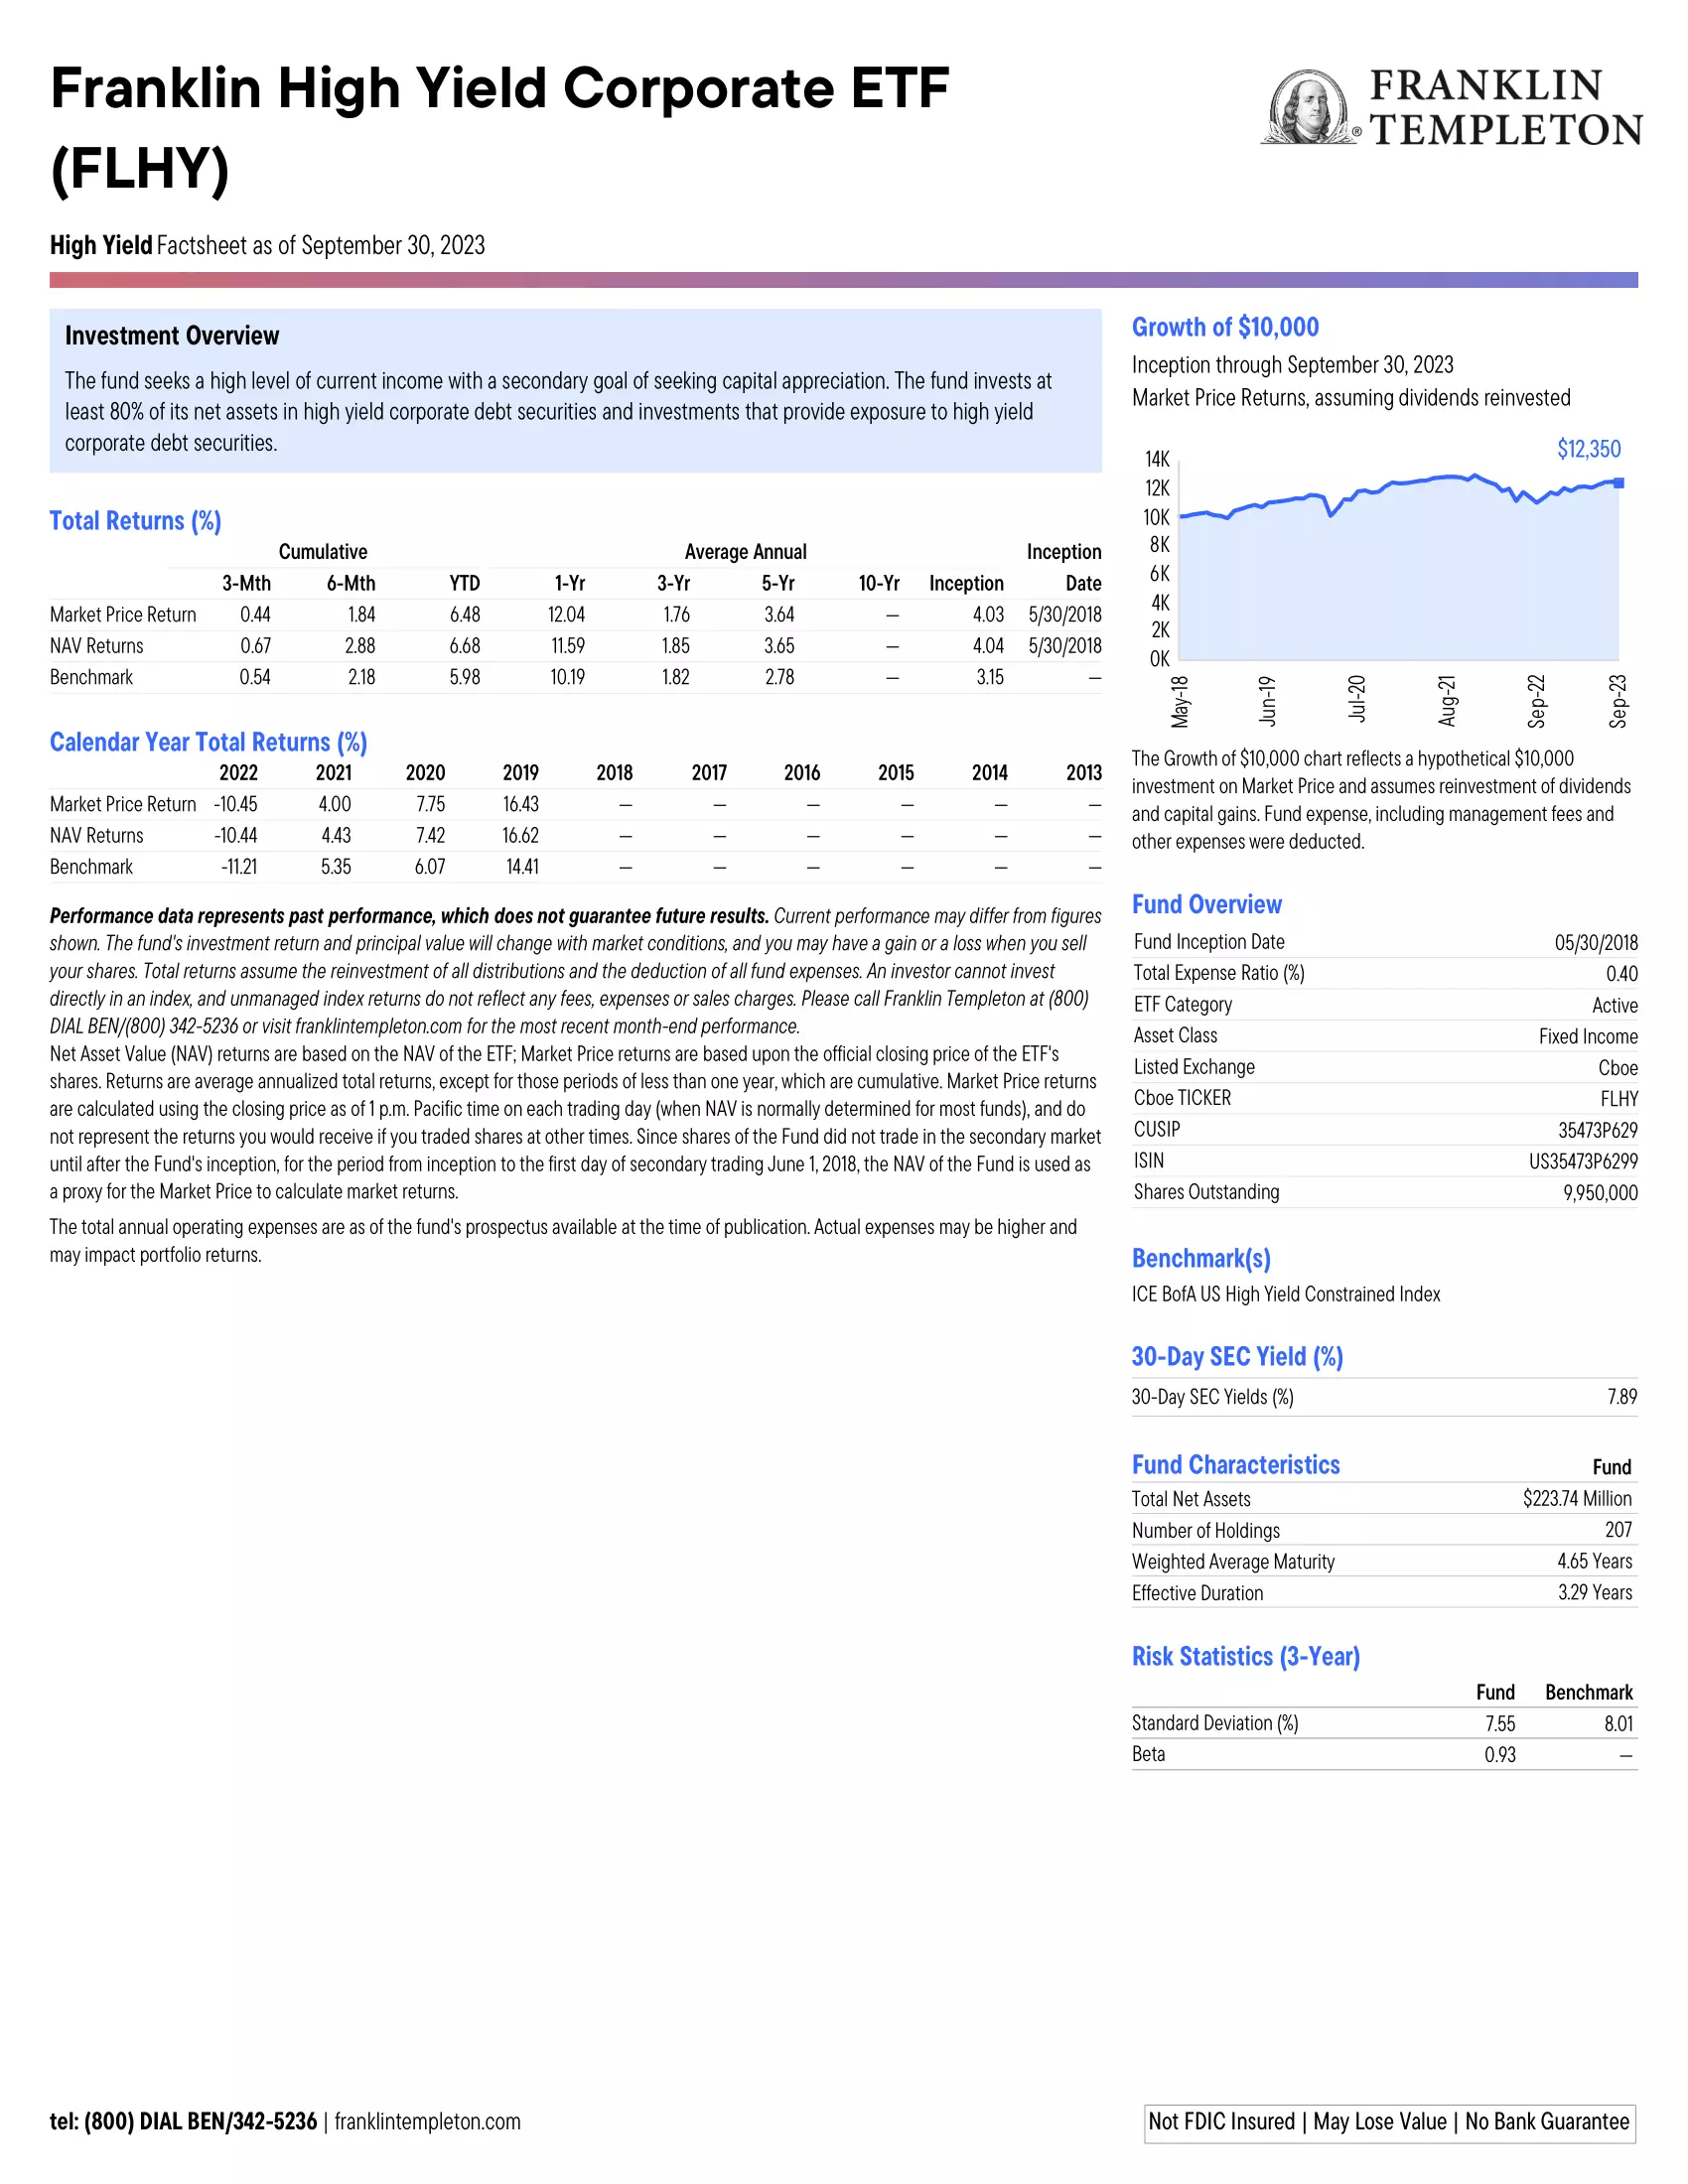 FLHY: Franklin High Yield Corporate ETF